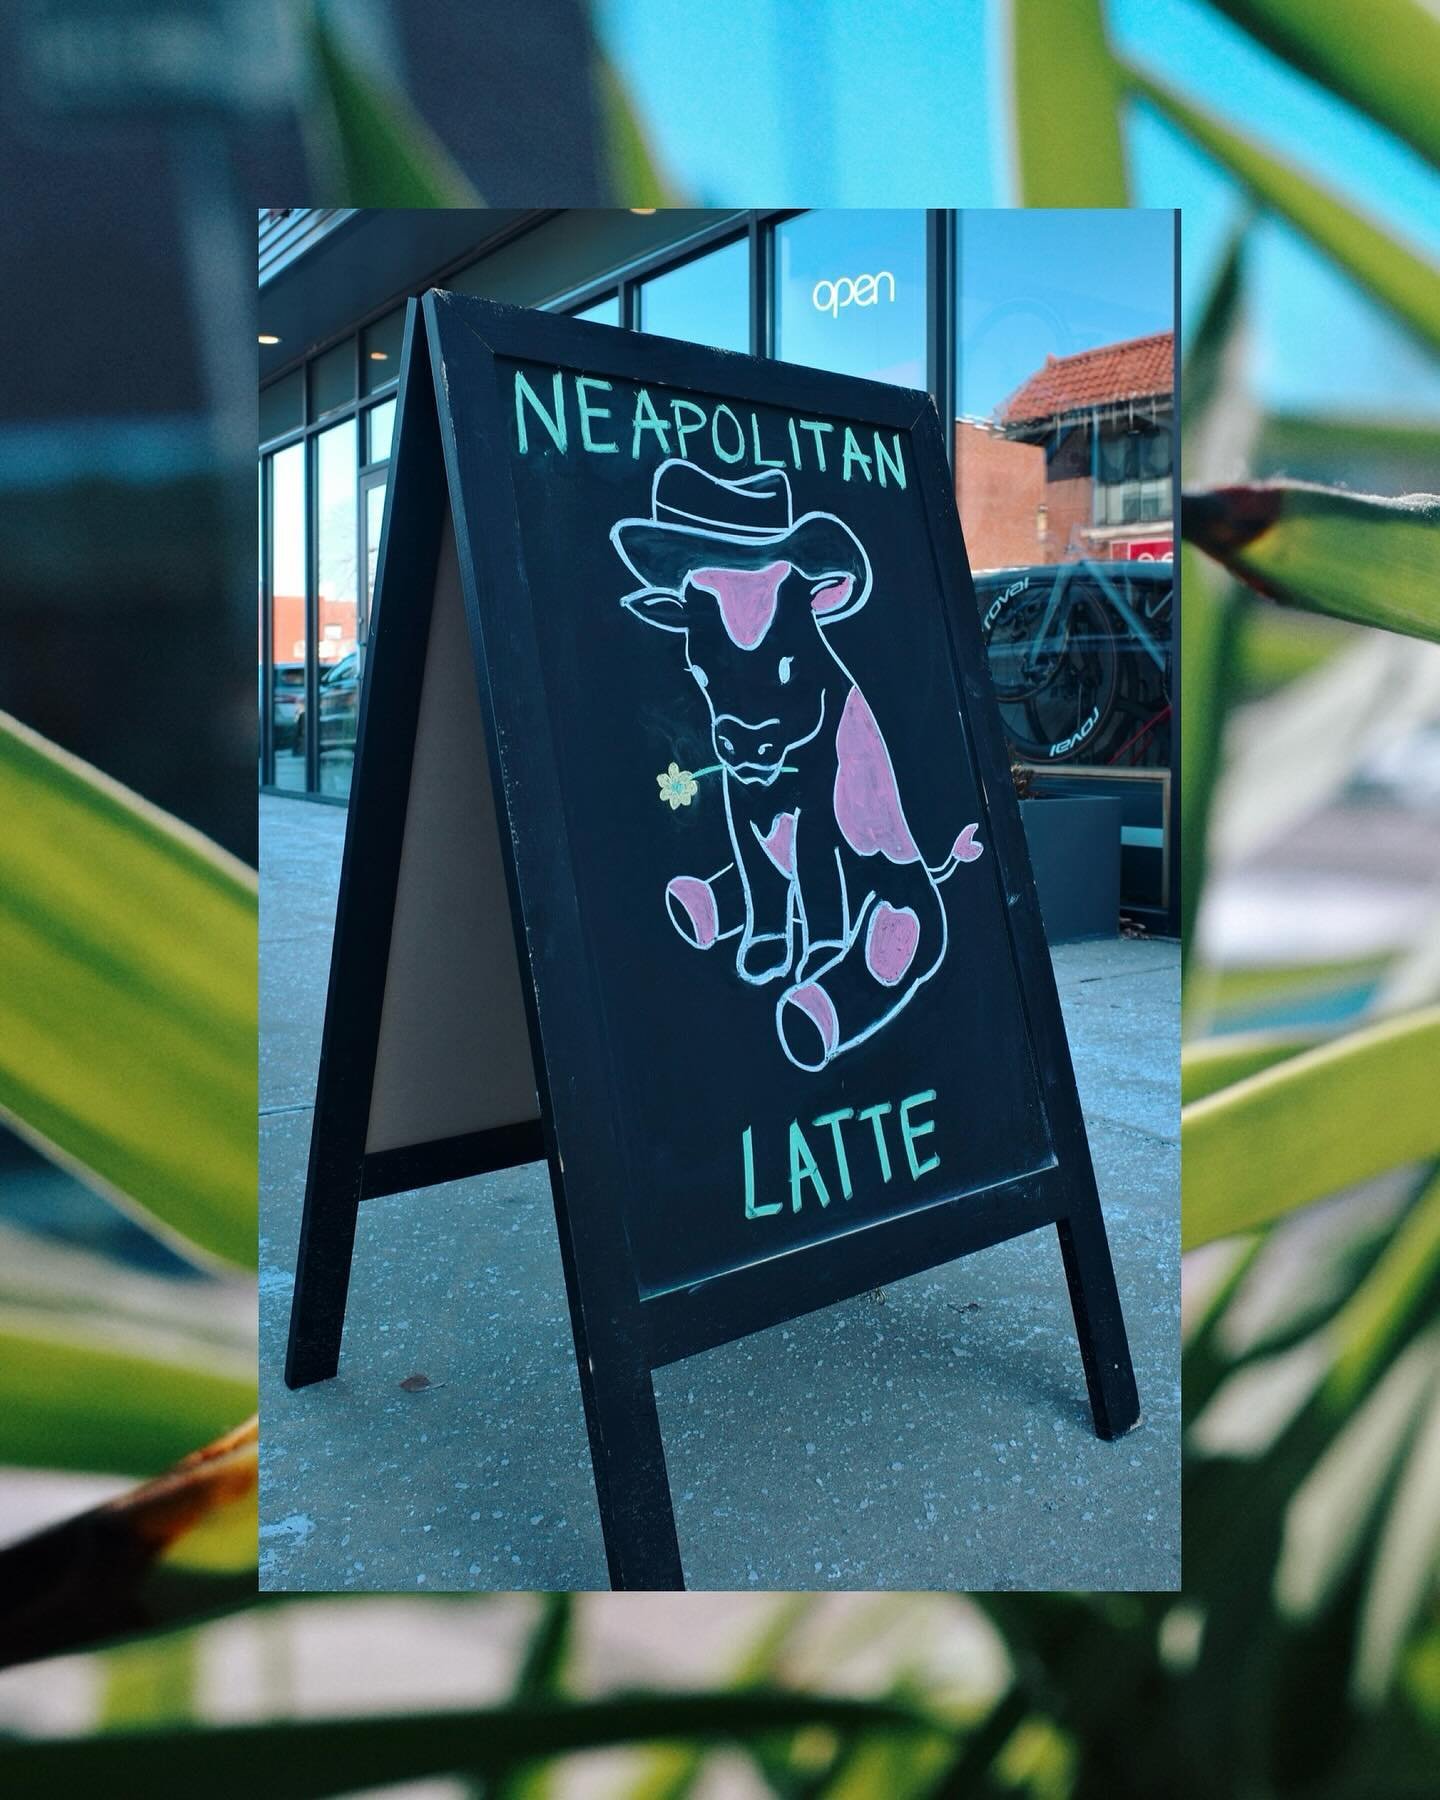 Just added a seasonal Neapolitan Latte, available hot or cold. Come and taste it today! 
🐮🤍🩷🤎☕️